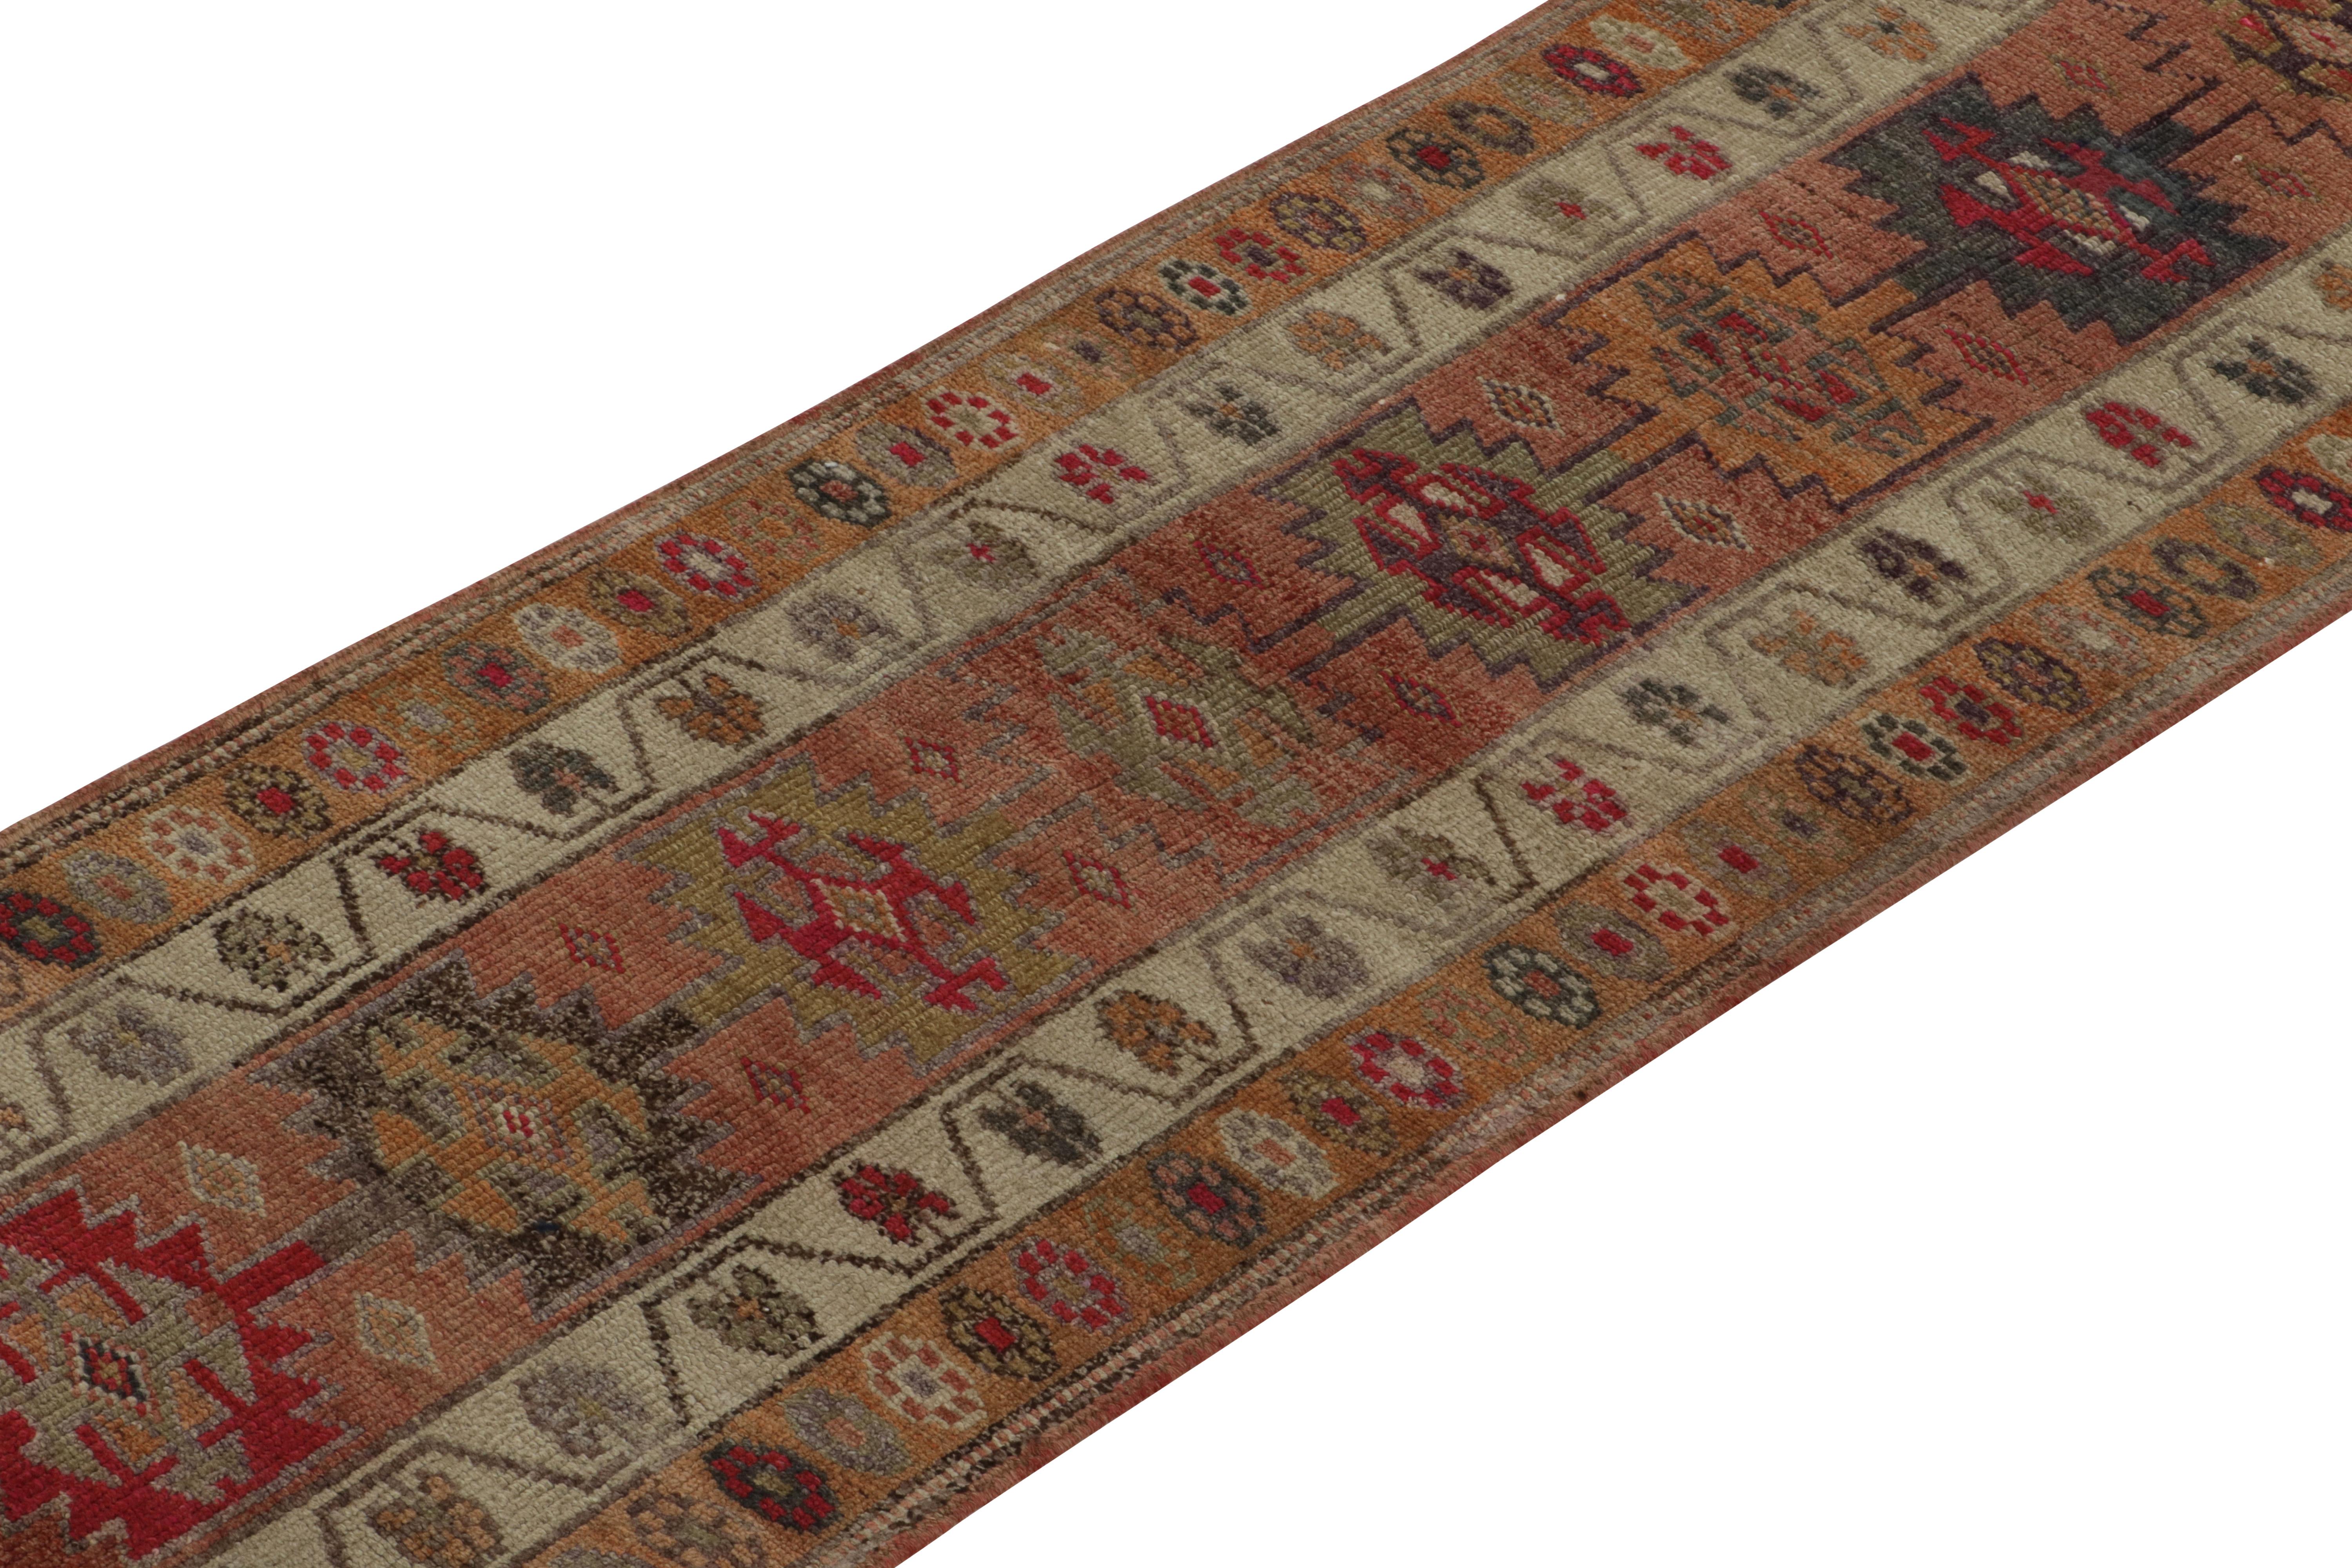 Vintage Turkish Runner in Beige-Brown, Rust Red Tribal Pattern by Rug & Kilim In Good Condition For Sale In Long Island City, NY